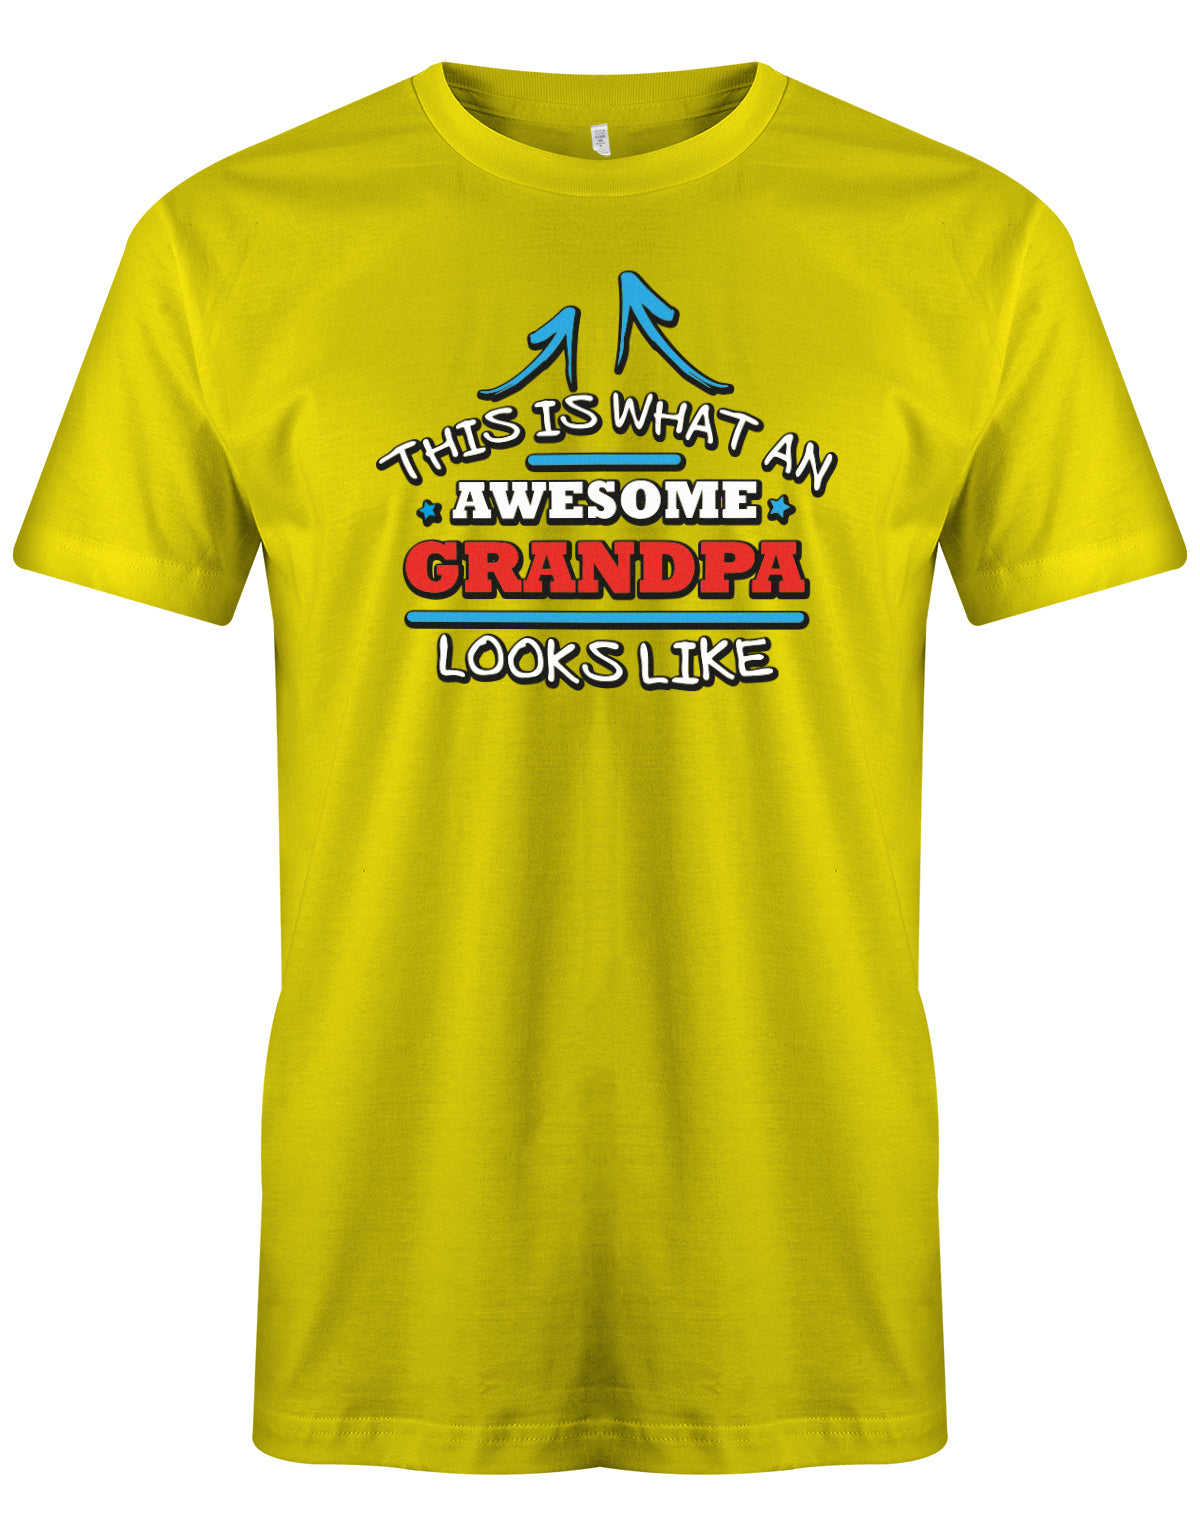 Opa T-Shirt – This is what an awesome Grandpa looks like. So sieht ein toller Opa aus. Gelb